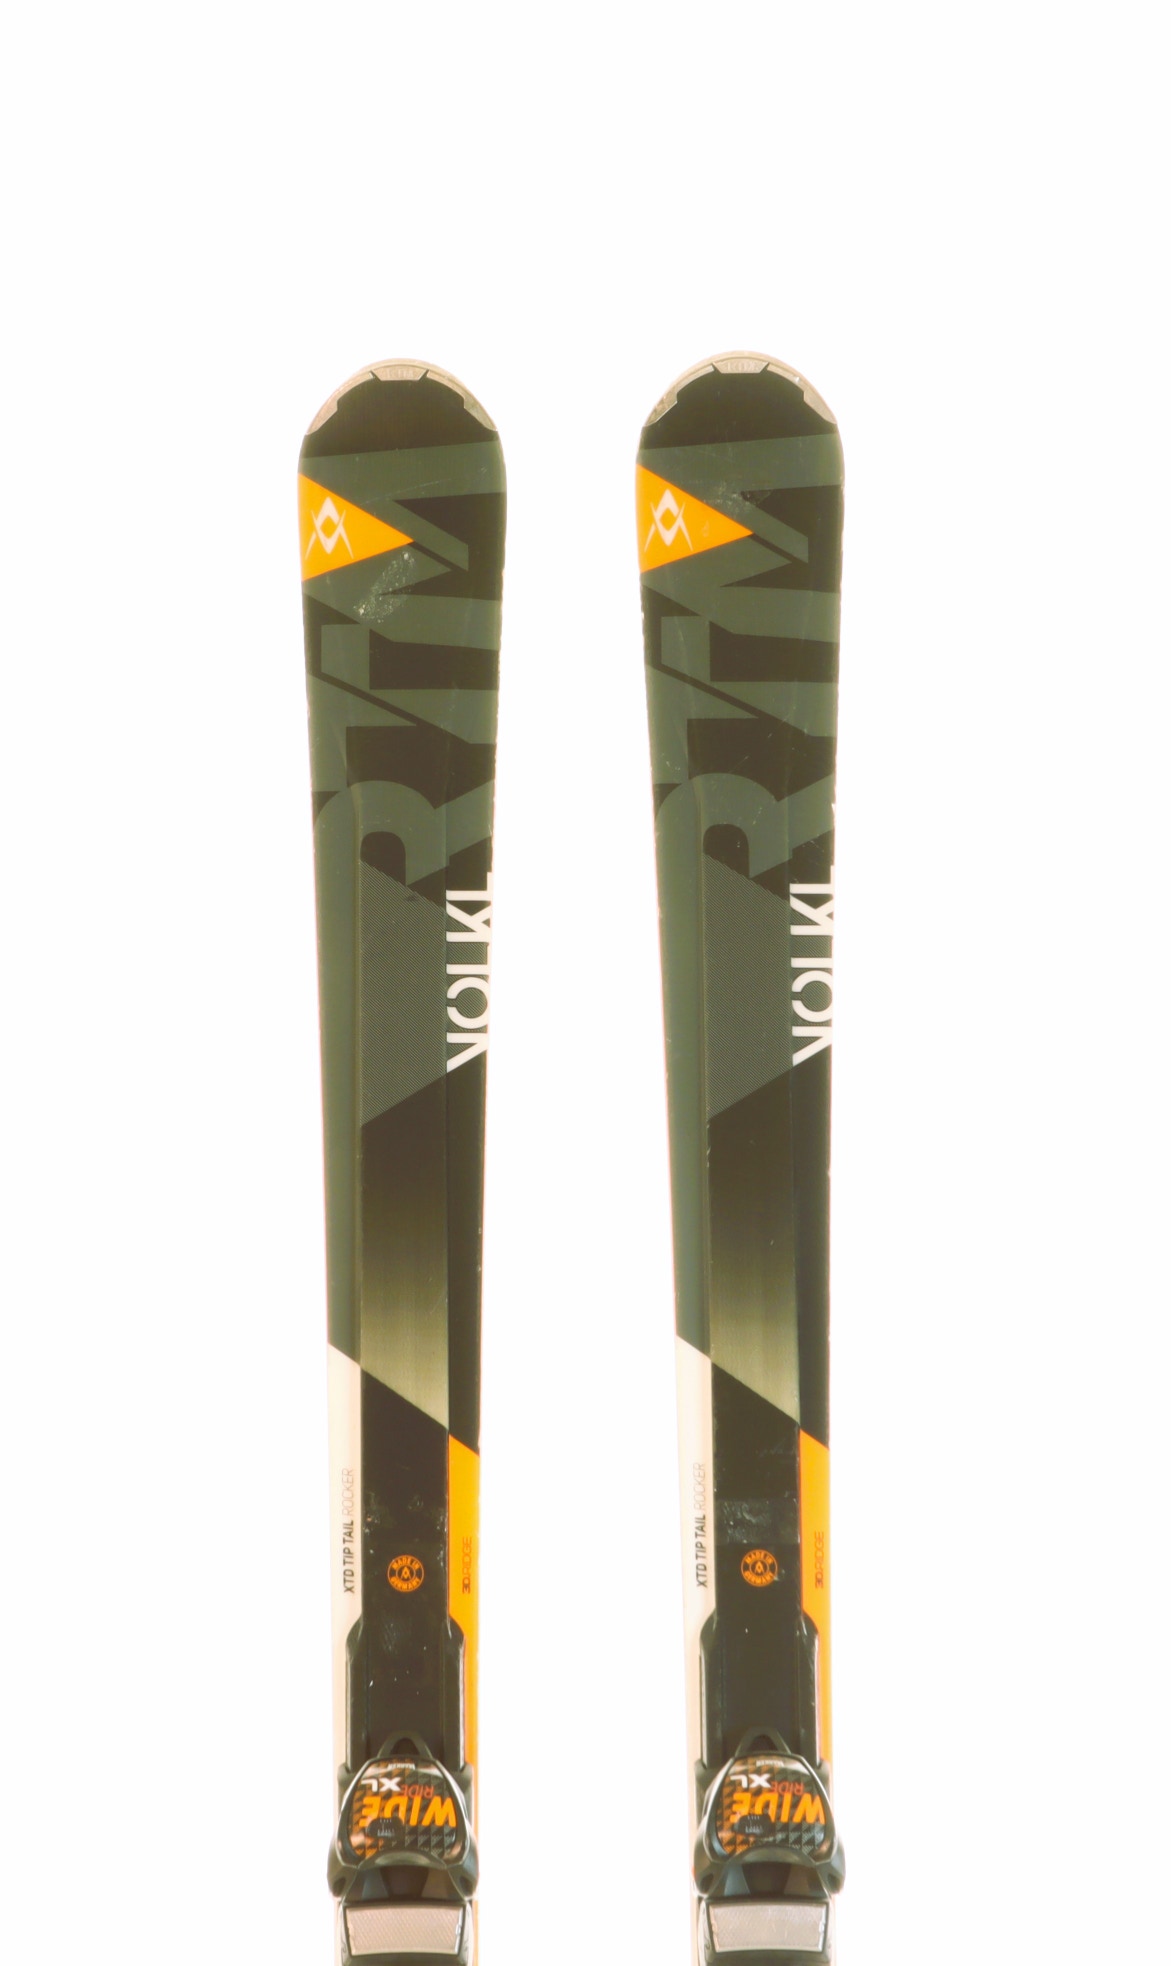 Used 2017 Volkl RTM 81 Skis with Marker Wide Ride XL Bindings Size 182 (Option 230934)